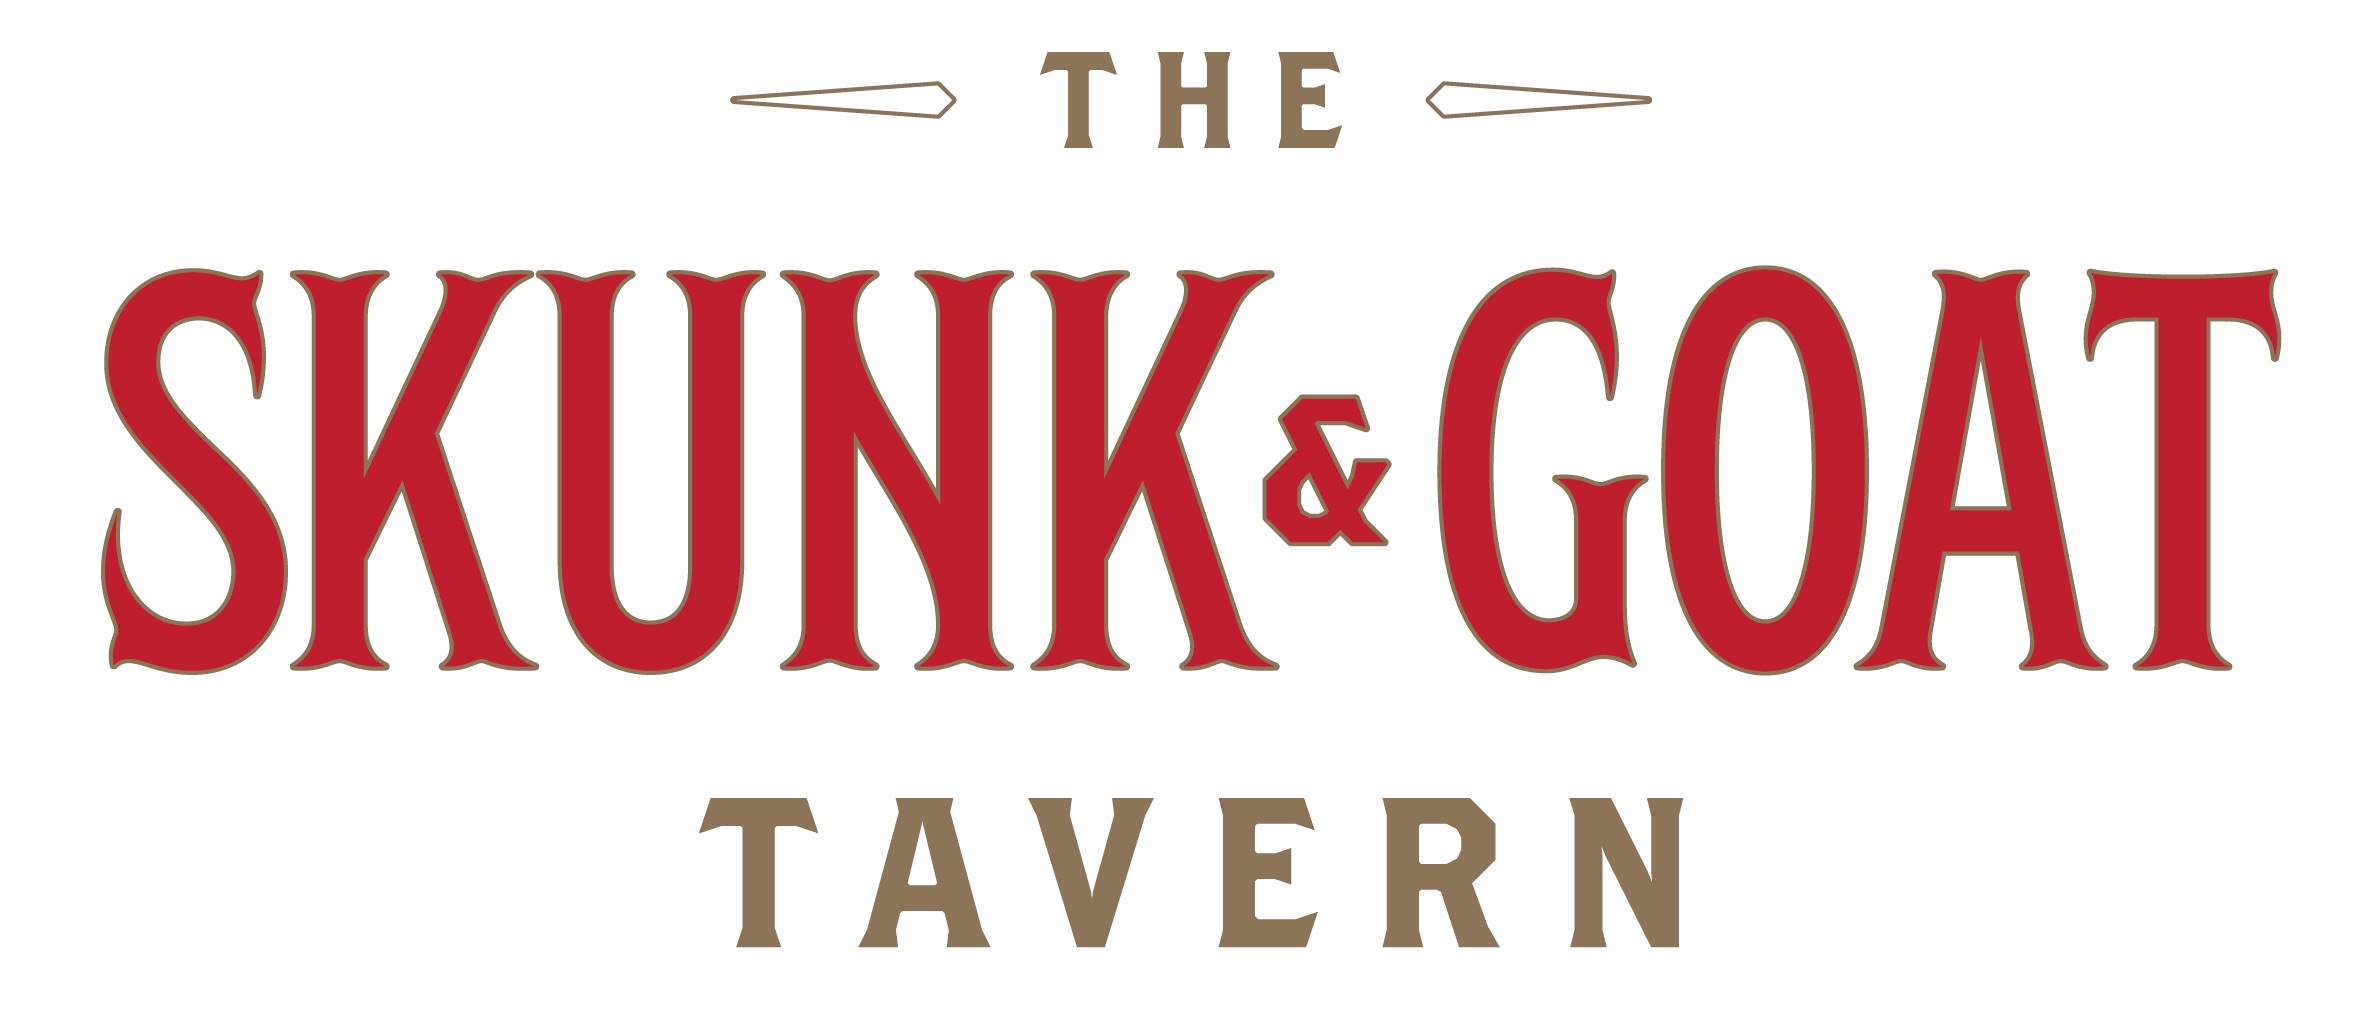 Skunk and Goat Tavern